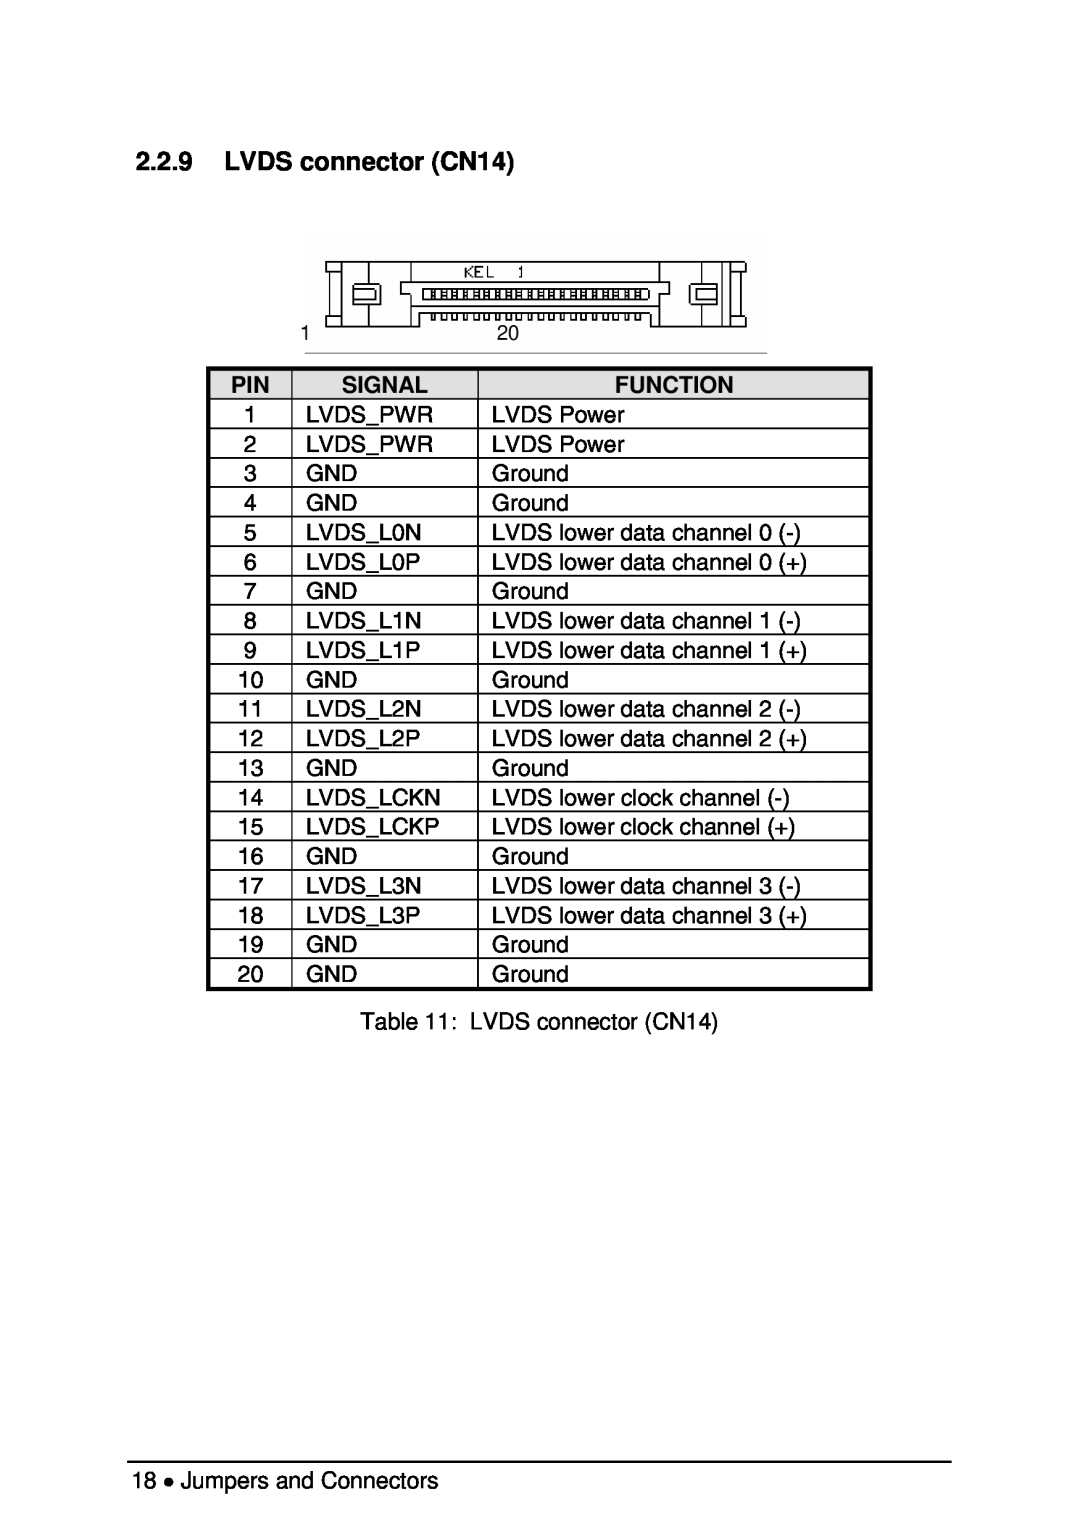 Intel NuPRO-850 user manual LVDS connector CN14, Signal, Function, Jumpers and Connectors 